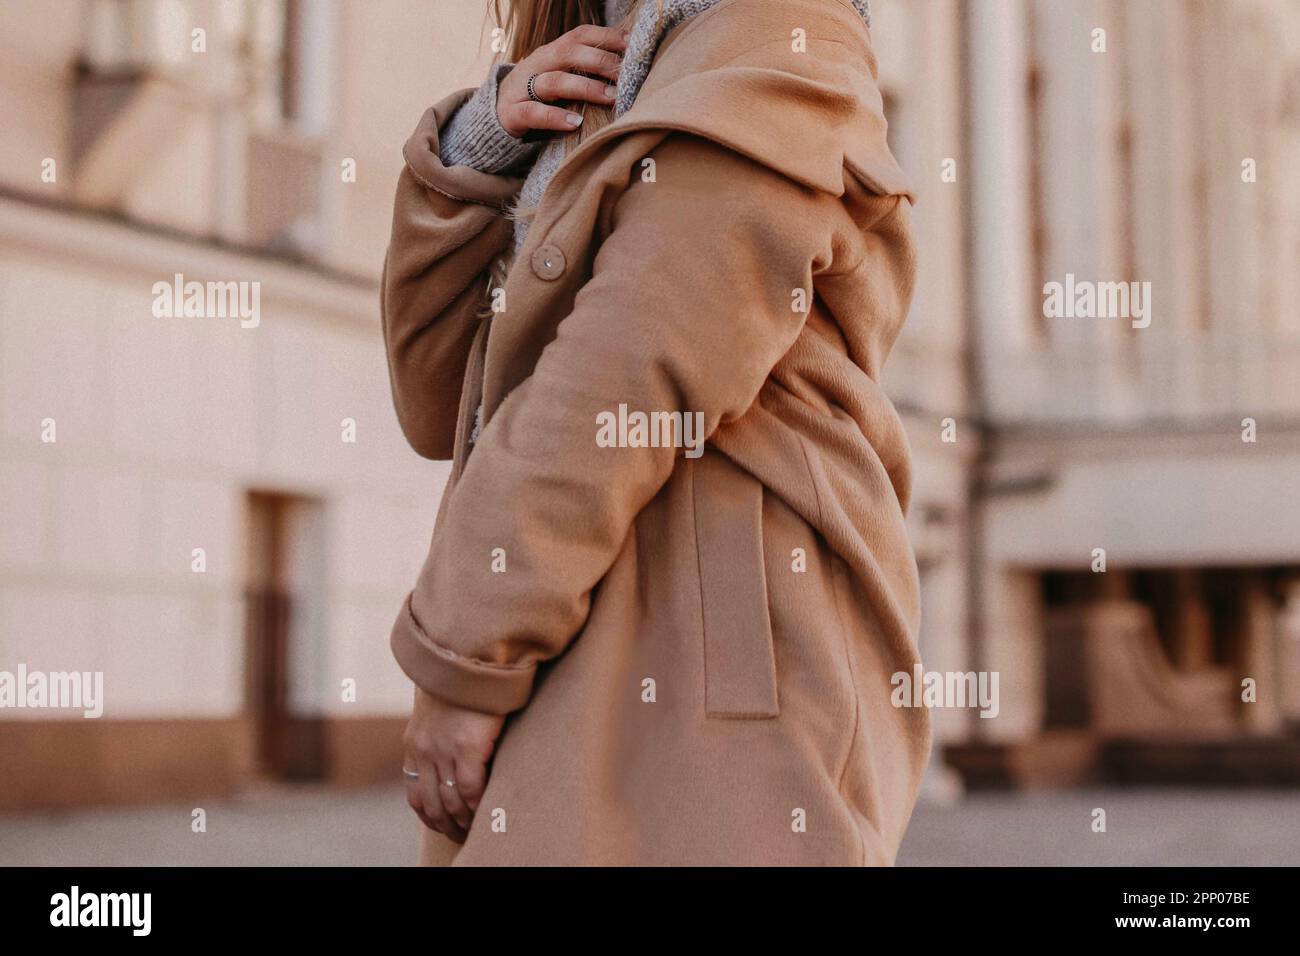 Outdoor fashion portrait of stylish young woman having fun, emotional face  , laughing, looking at camera. Urban city street style. Long jeans coat and  orange hoodie. Spring or fall outfit. Stock Photo